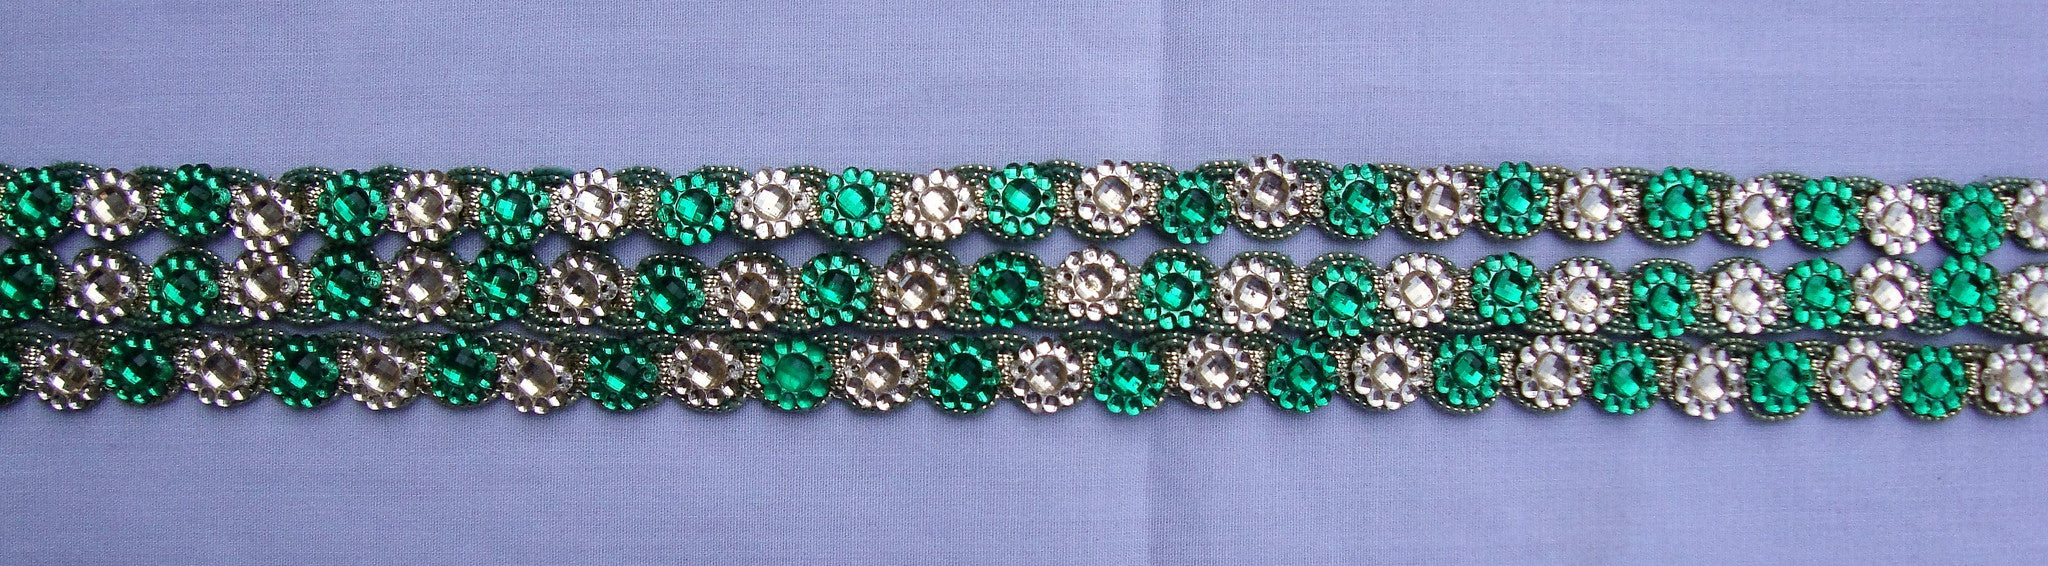 Green Beaded Trimming (Sold as a 3 yard piece)